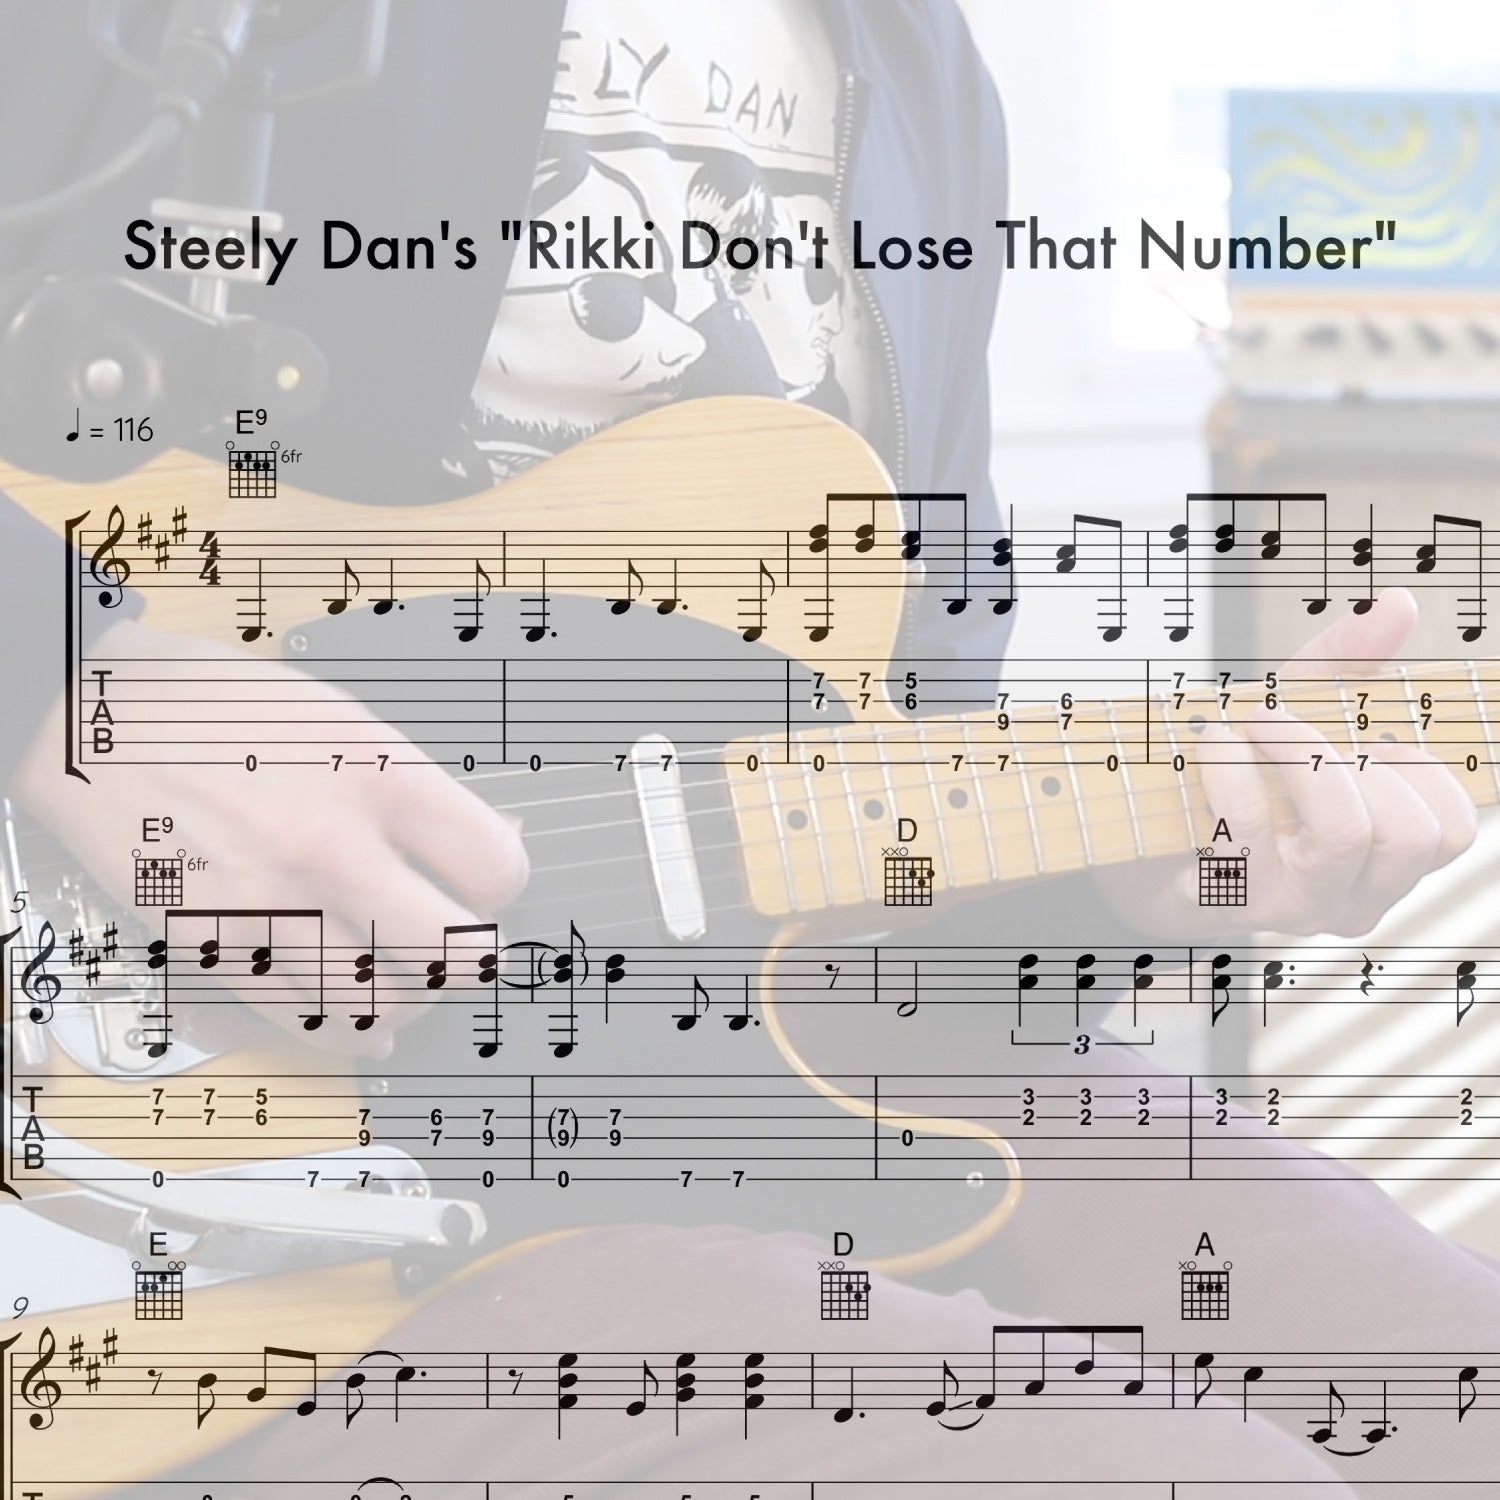 Steely Dan's "Rikki Don't Lose That Number"